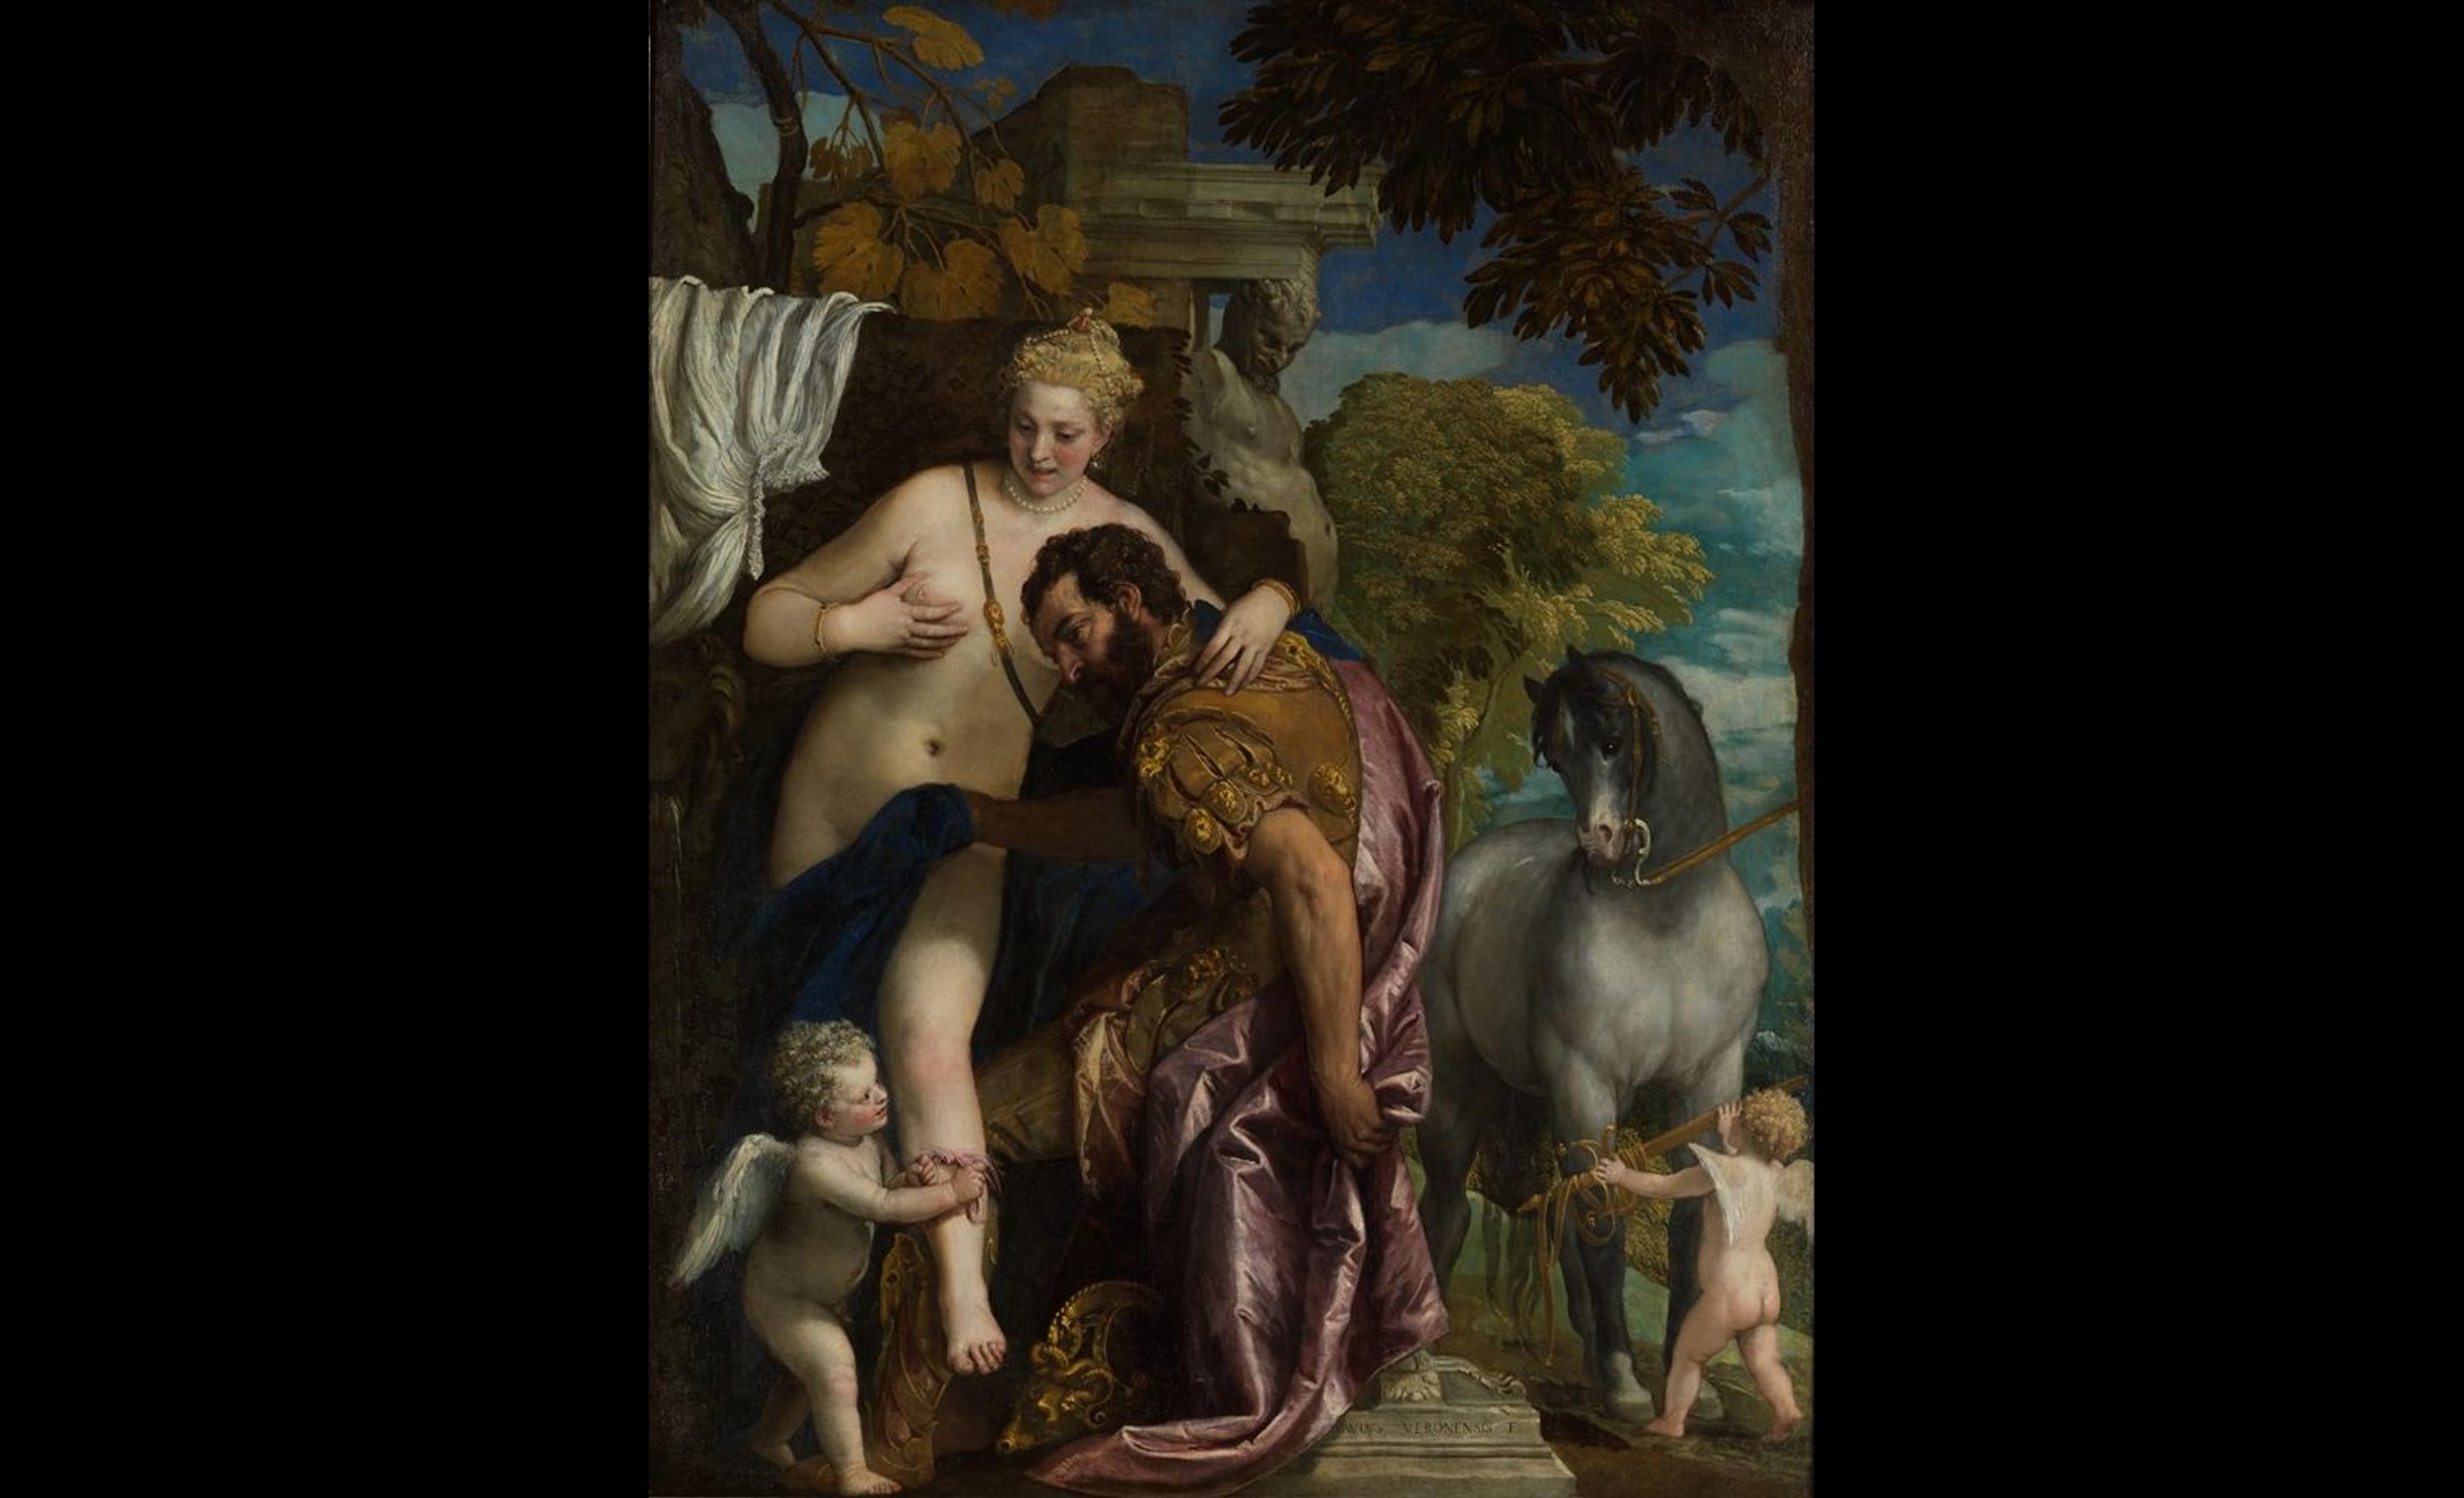 Paolo Veronese painting depicting Mars and Venus in a tight landscape